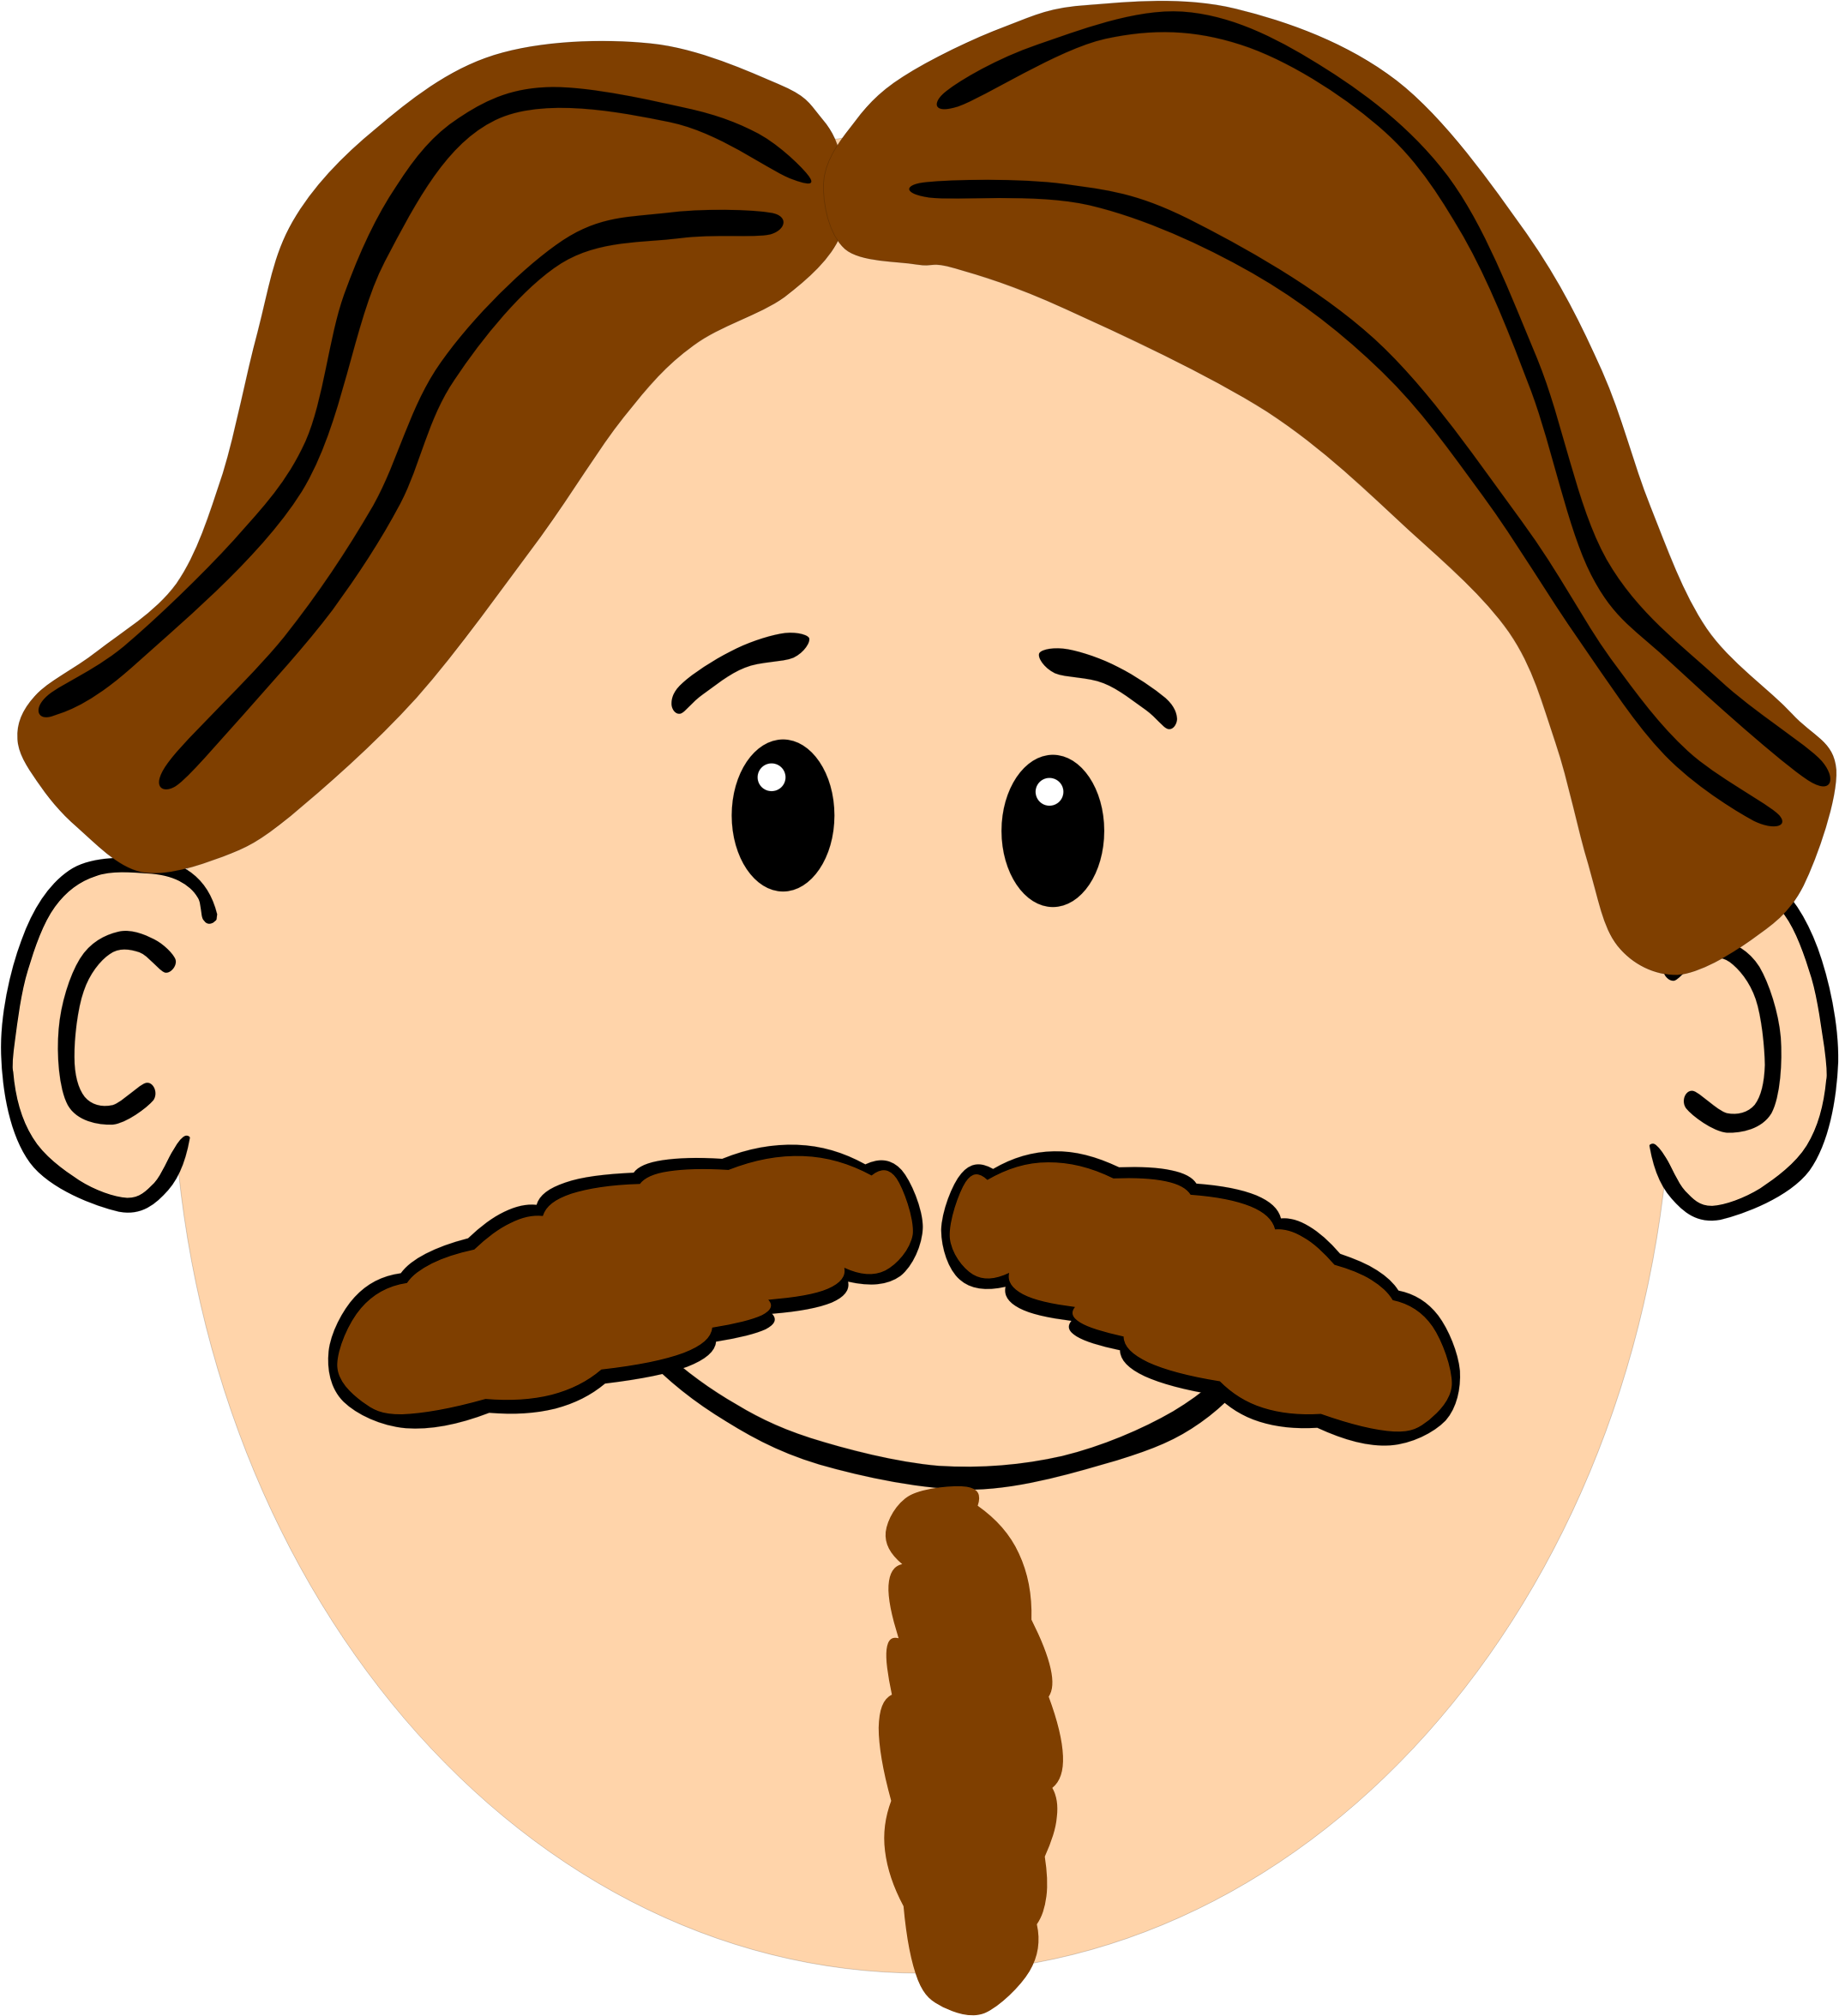 With Brown Hair Mustache And Goatee - Cartoon Man With Moustache (2145x2352)